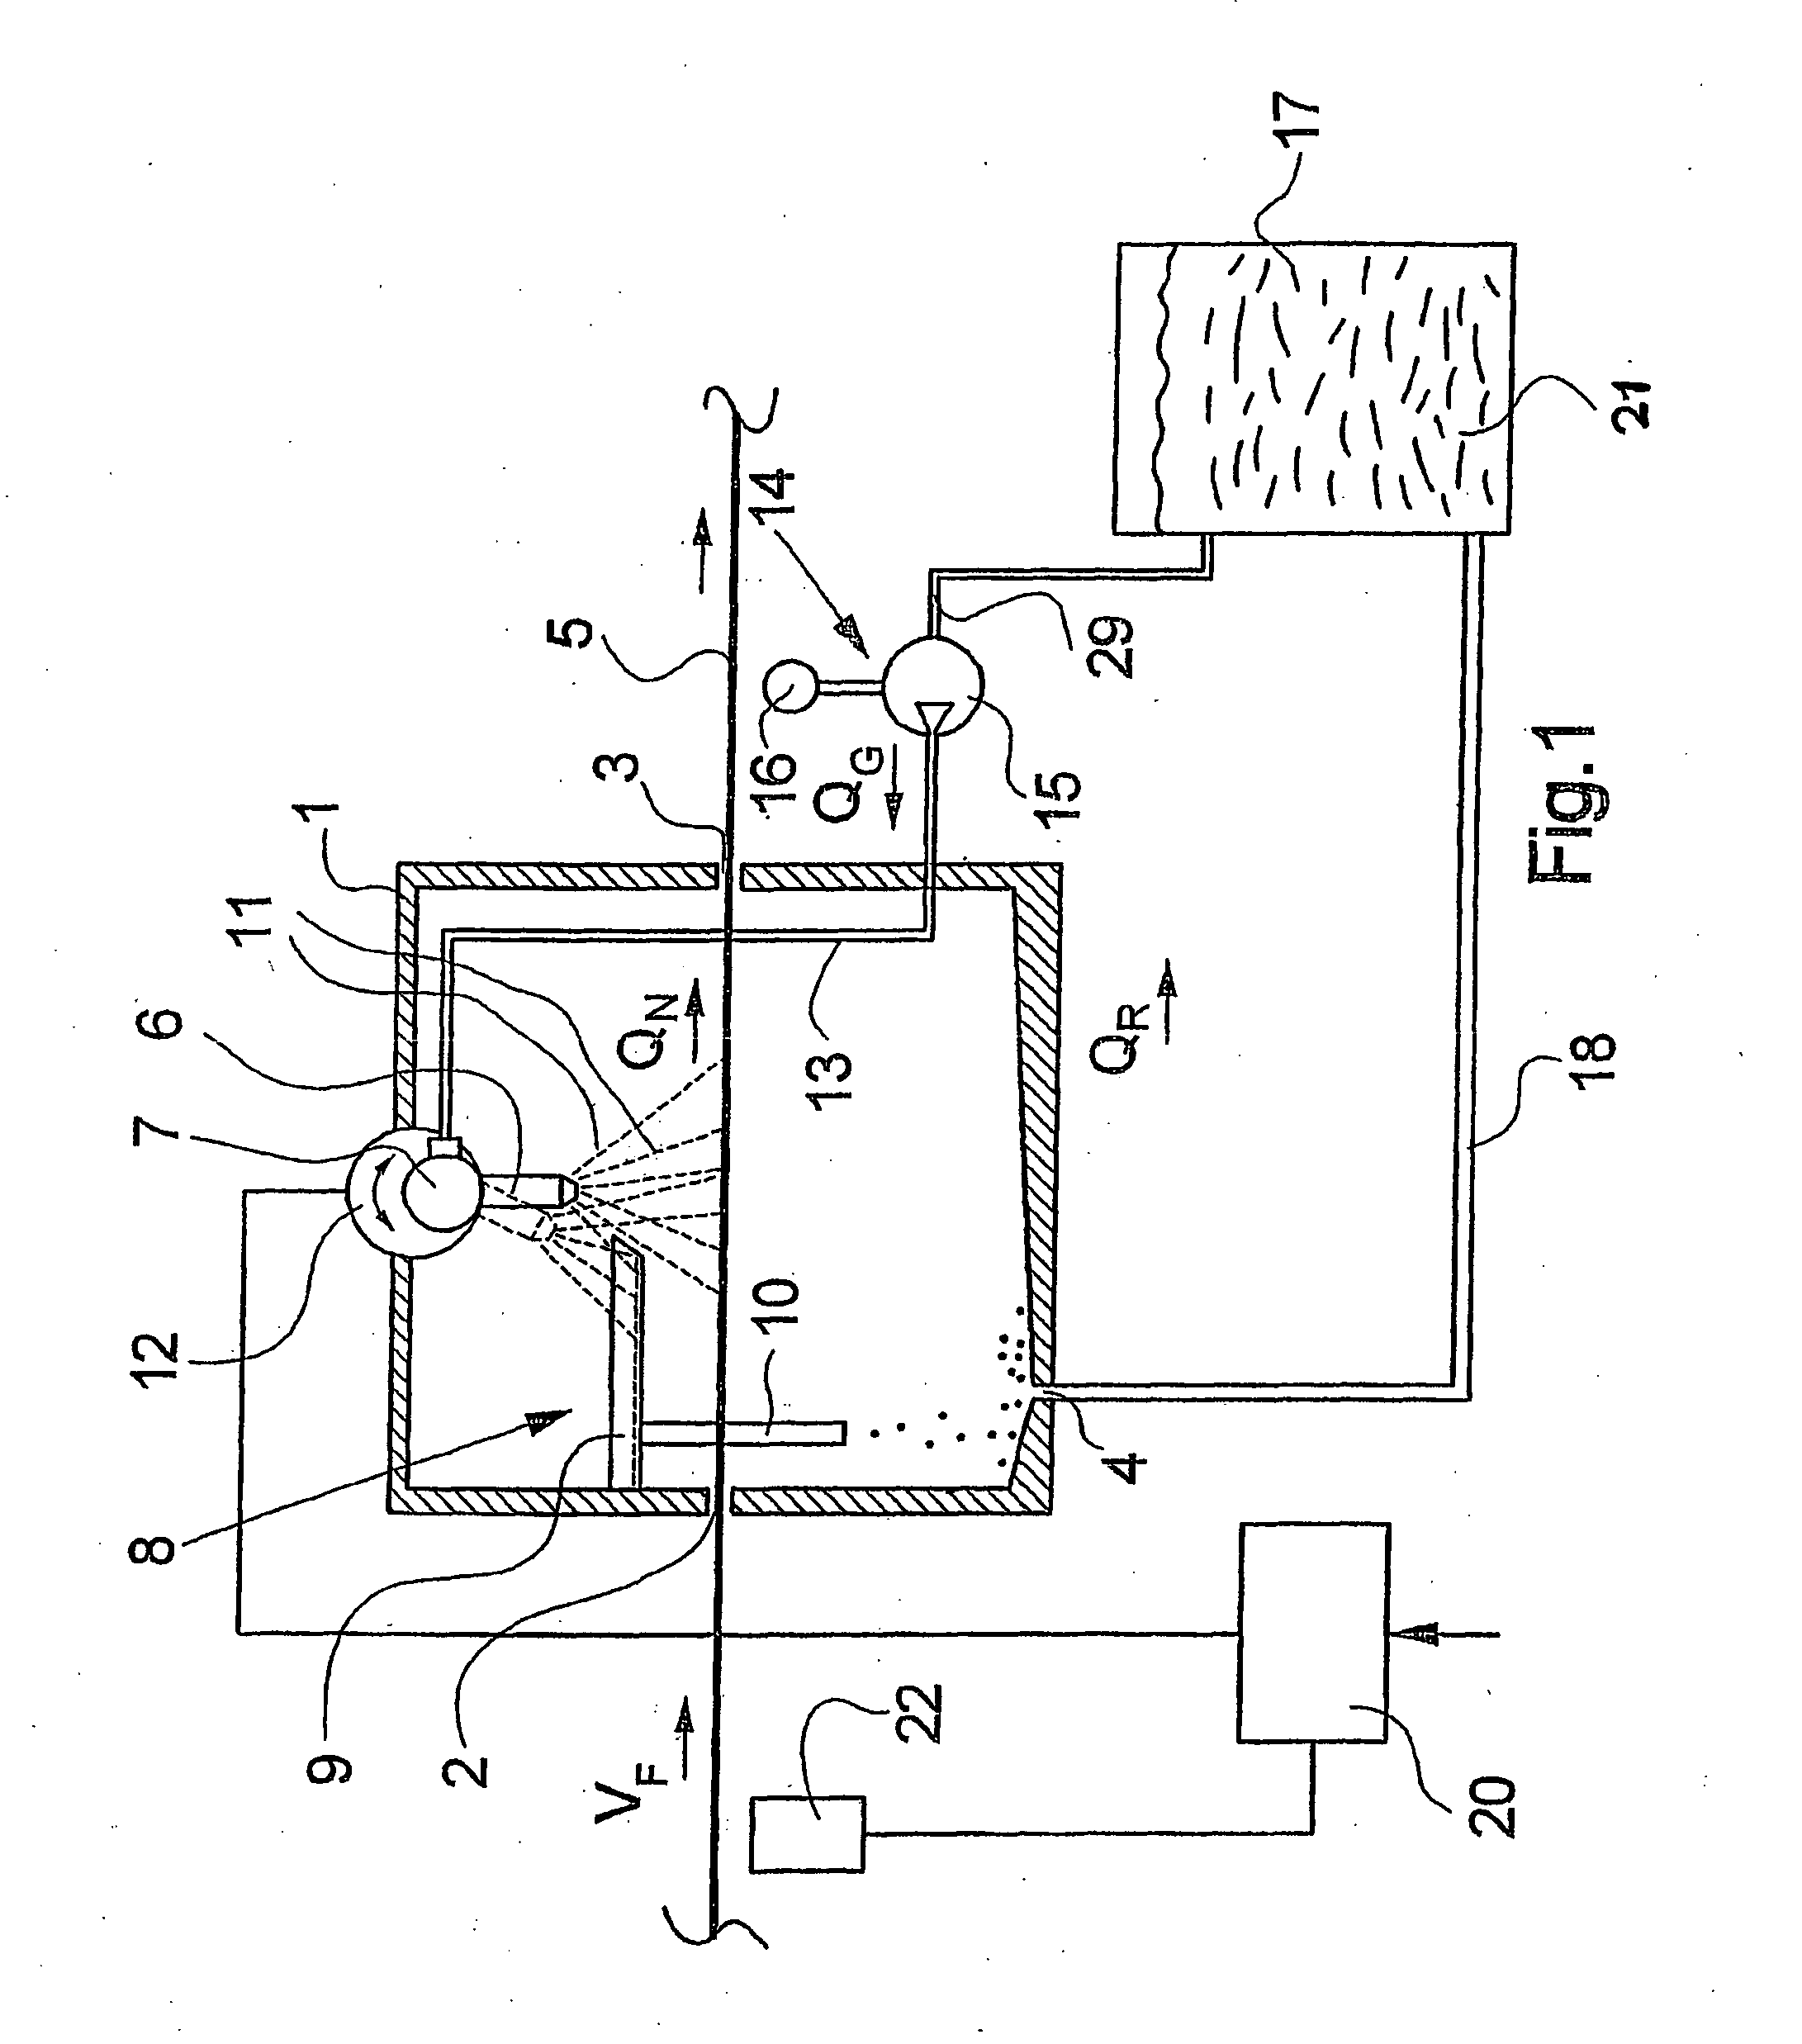 Method and apparatus for wetting a running filament strand